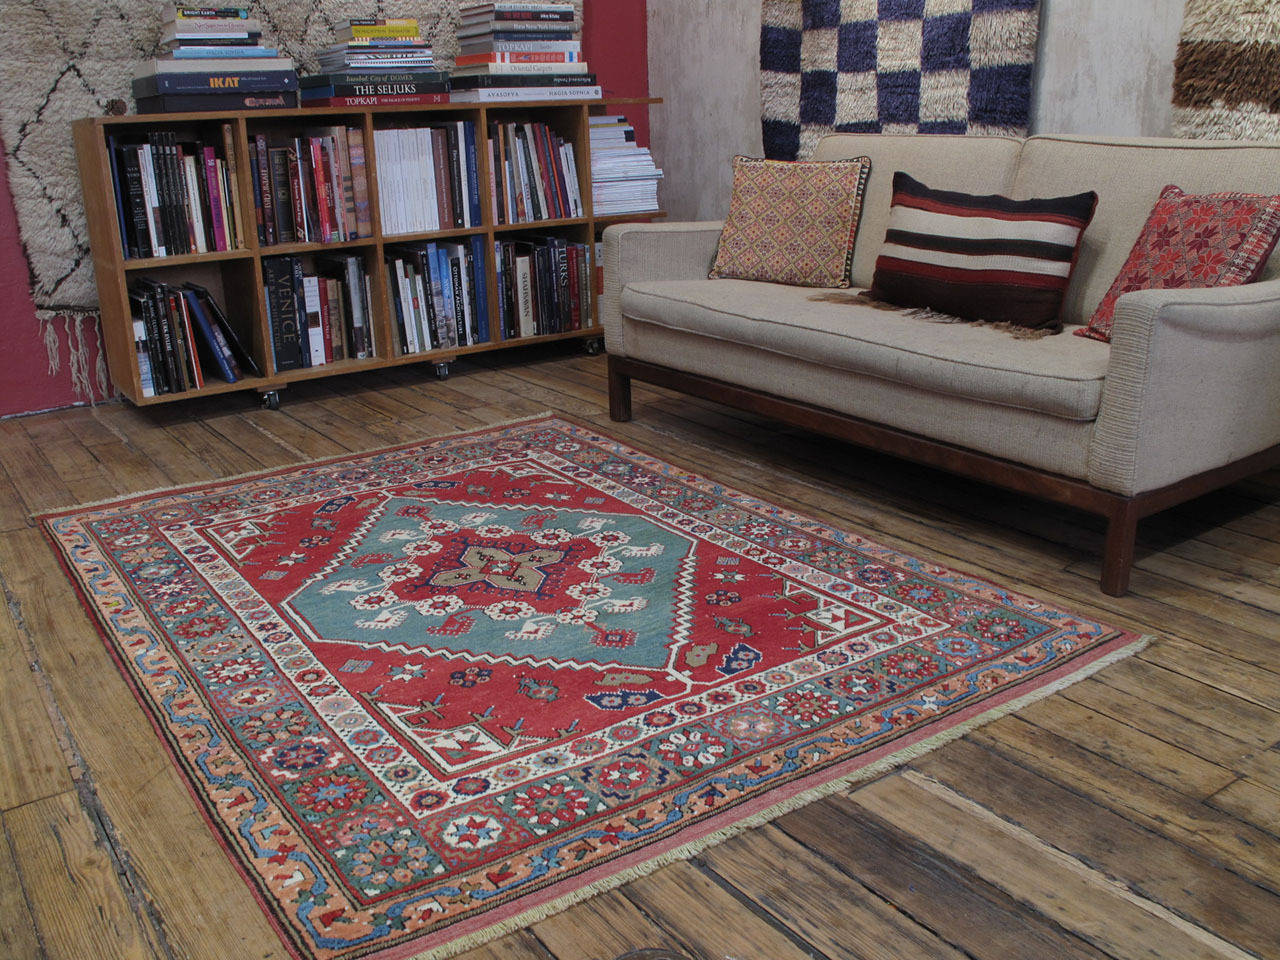 Dazkiri rug. A wonderful example of village weaving rug from Western Turkey, from the twilight years of a centuries-old tradition. Every tribal group in this once prolific region produced weavings like this that featured their distinct designs and